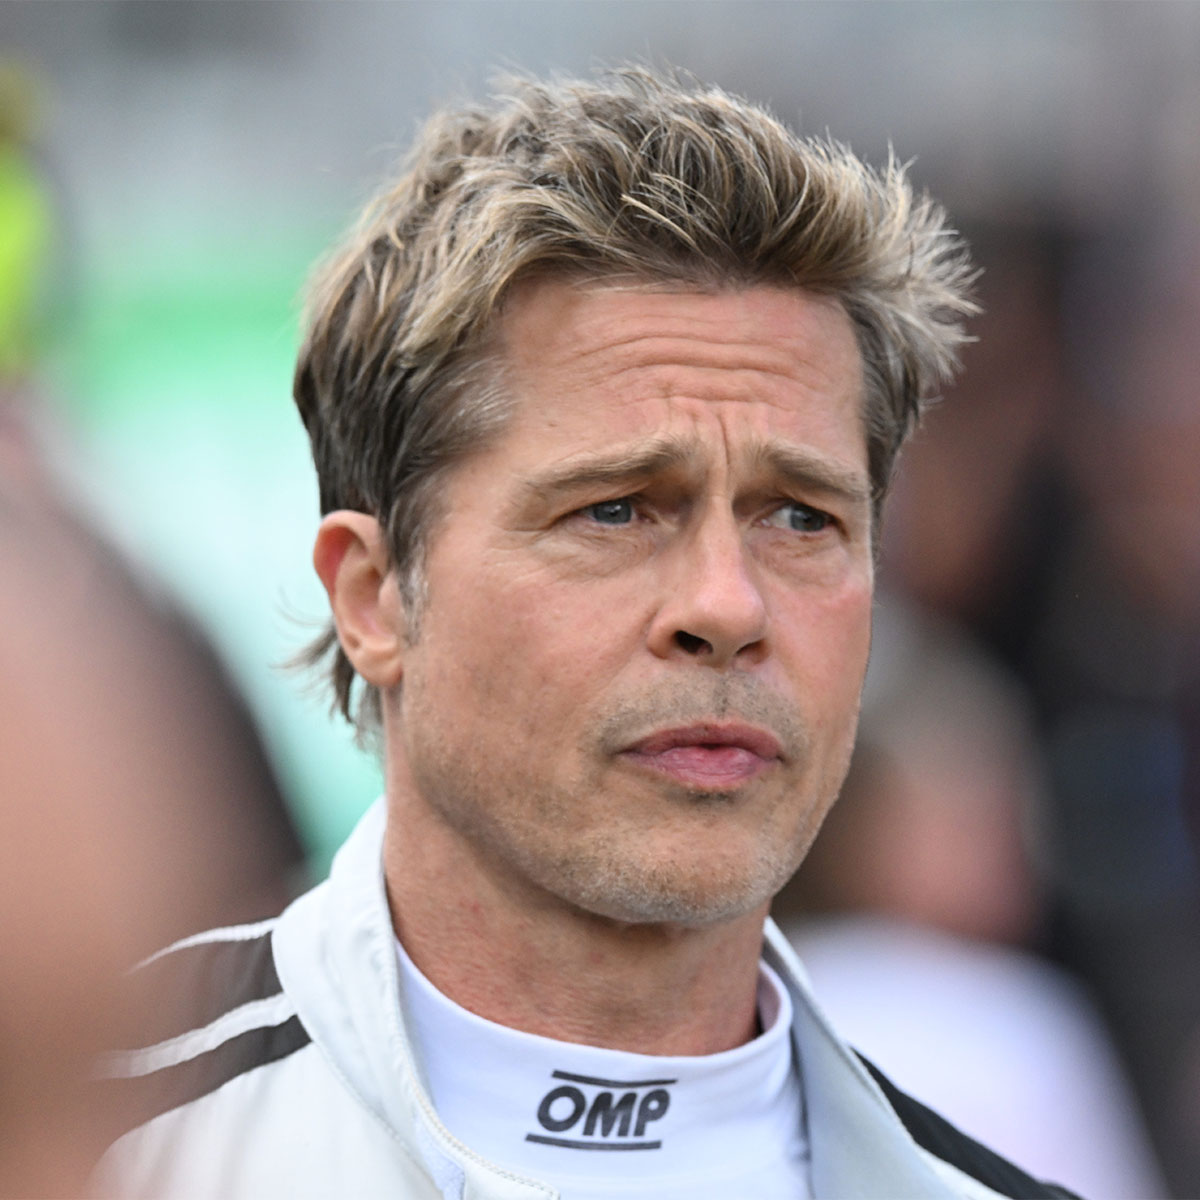 Brad Pitt's Son Says That He's An 'Awful Human Being' In Scathing